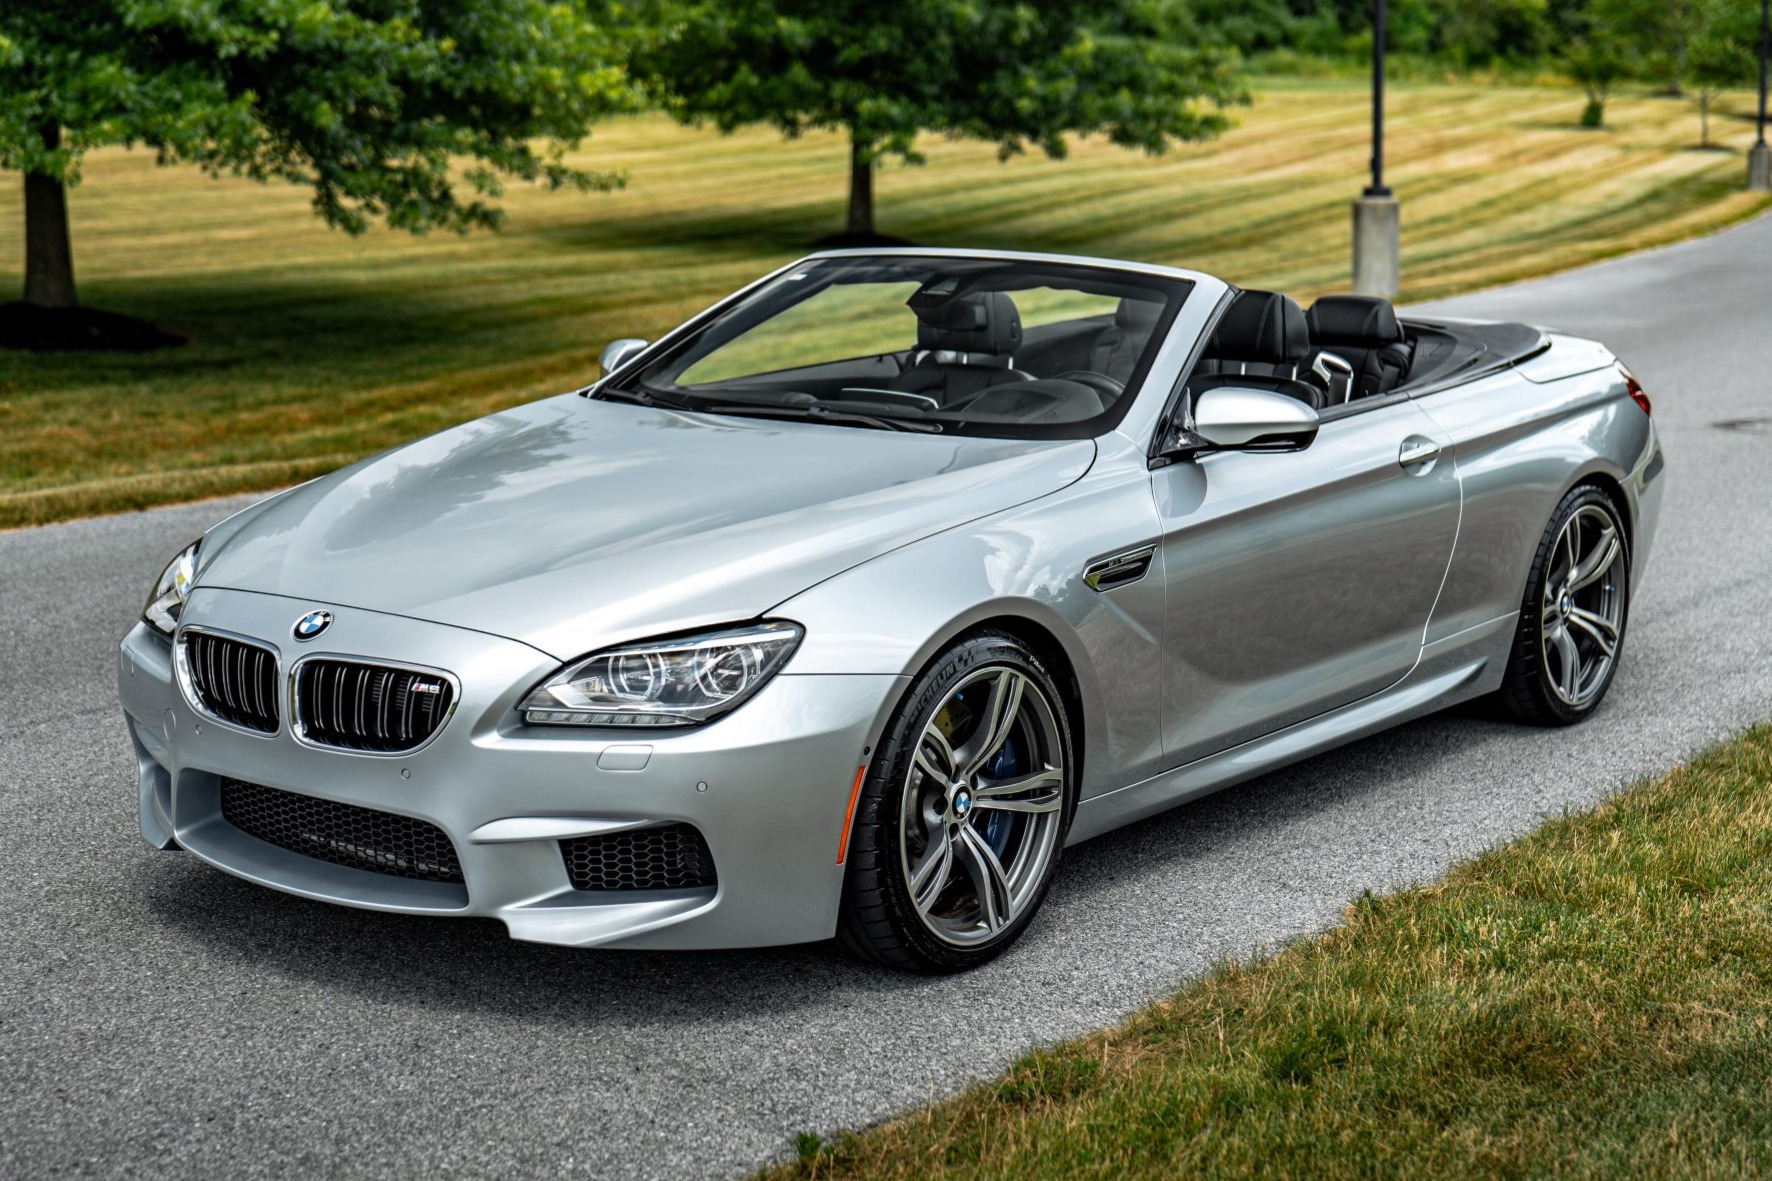 Used 10k-Mile 2013 BMW M6 Convertible Review